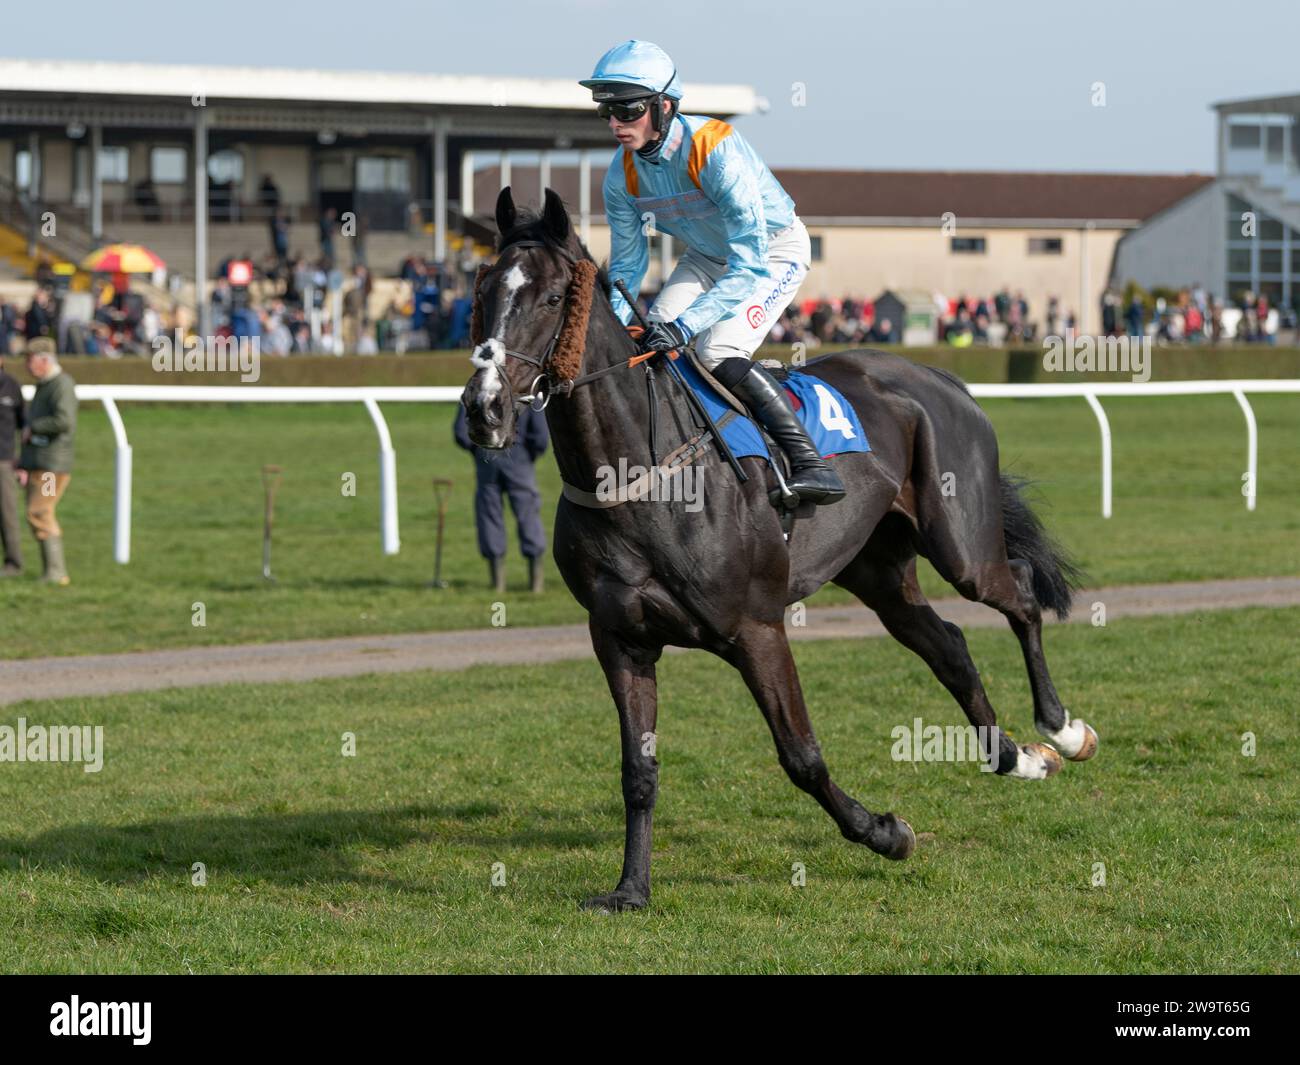 Glajou, trained by Paul Nicholls and ridden by Harry Cobden, places third in the Class 3 handicap chase at Wincanton, March 21st 2022 Stock Photo